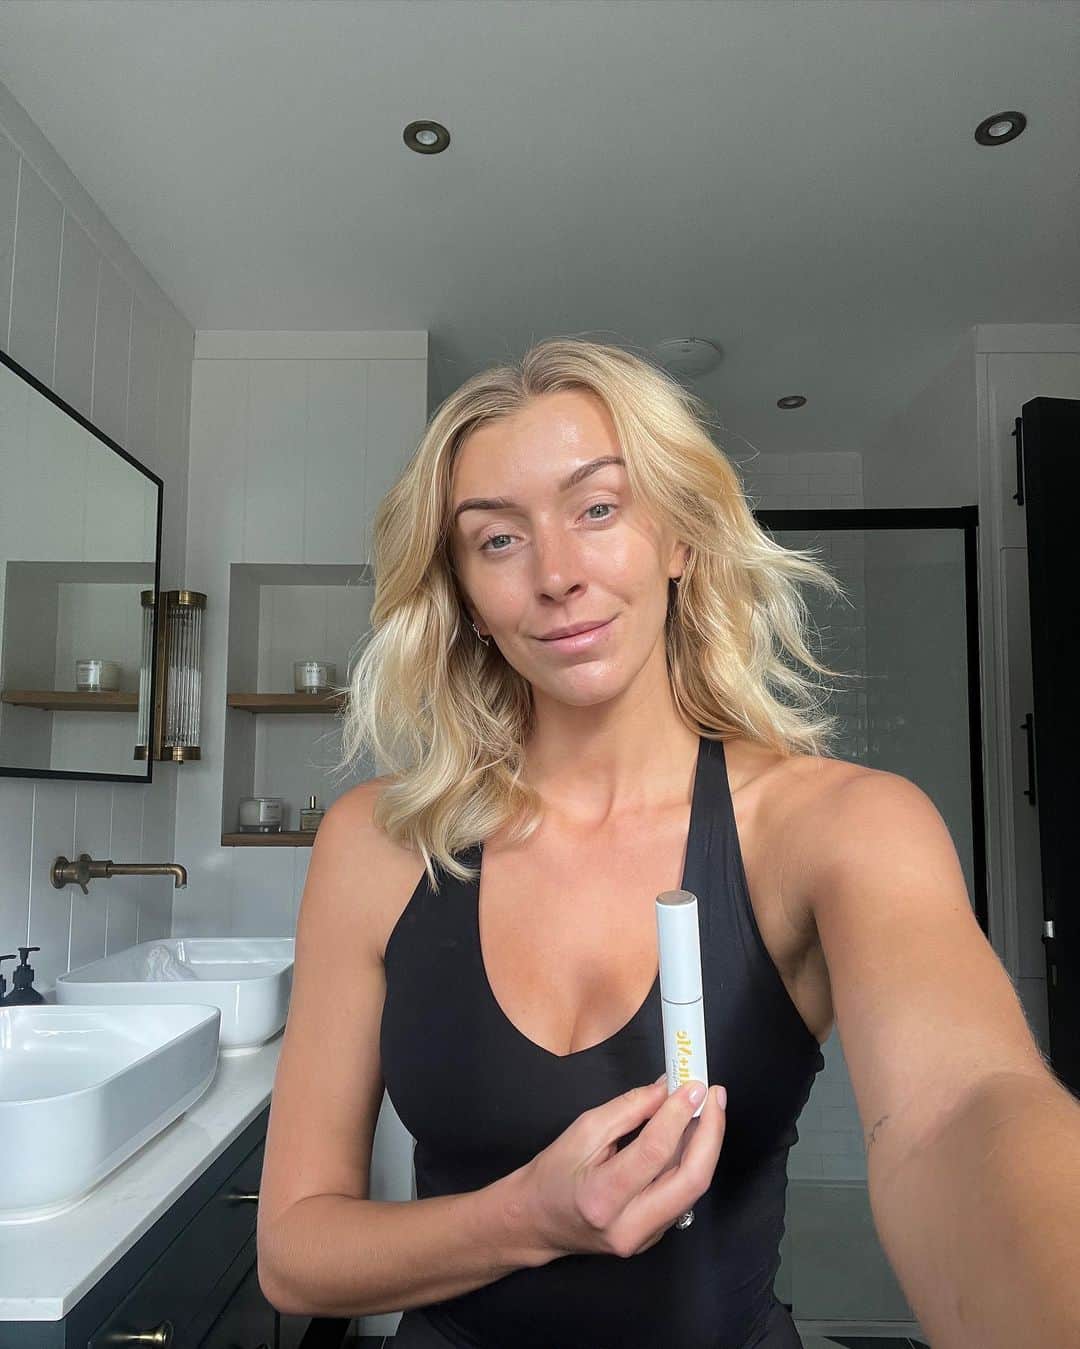 Zanna Van Dijkのインスタグラム：「7 things that are making me happy ✨ ad  1️⃣ The bare faced feeling thanks to @skinandmehq. Nothing is more effective at clearing my skin than the Daily Doser 👌🏼  2️⃣ Sunday roasts at Surrey pubs 🍽️  3️⃣ The autumn light through the trees 🍂  4️⃣ My favourite skincare product, I’ve used it consistently for coming up on 18 months now. I love that it can be tailored to my changing skin goals (right now it’s all about managing my hormonal breakouts!). My code ZANNAVD11 gets your first Daily Doser for £4.99 ✨  5️⃣ Quality time with my parents 🫶🏼  6️⃣ Cold plunging in our tub ❄️  7️⃣ Taking Ant bouldering for the first time 🧗‍♀️」